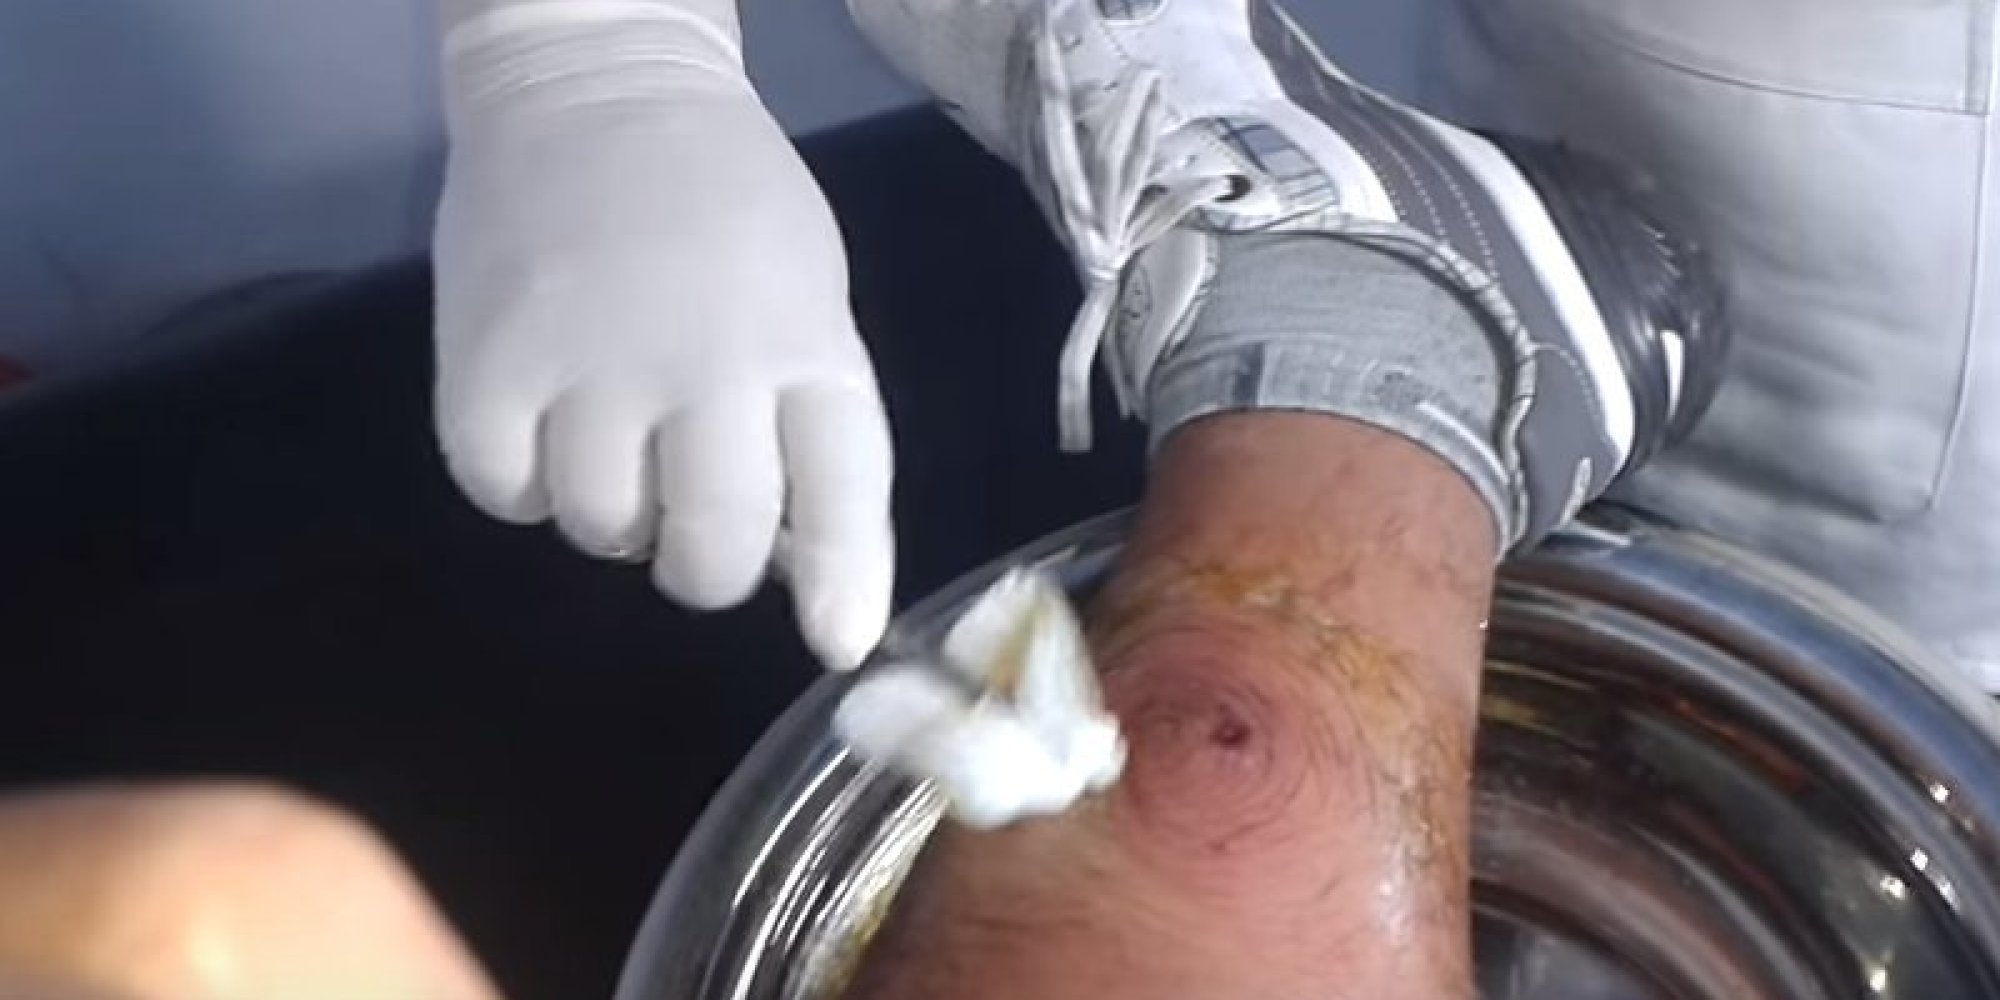 Warning: Video Of Man Having 3-Month-Old Cyst Removed From Leg Is